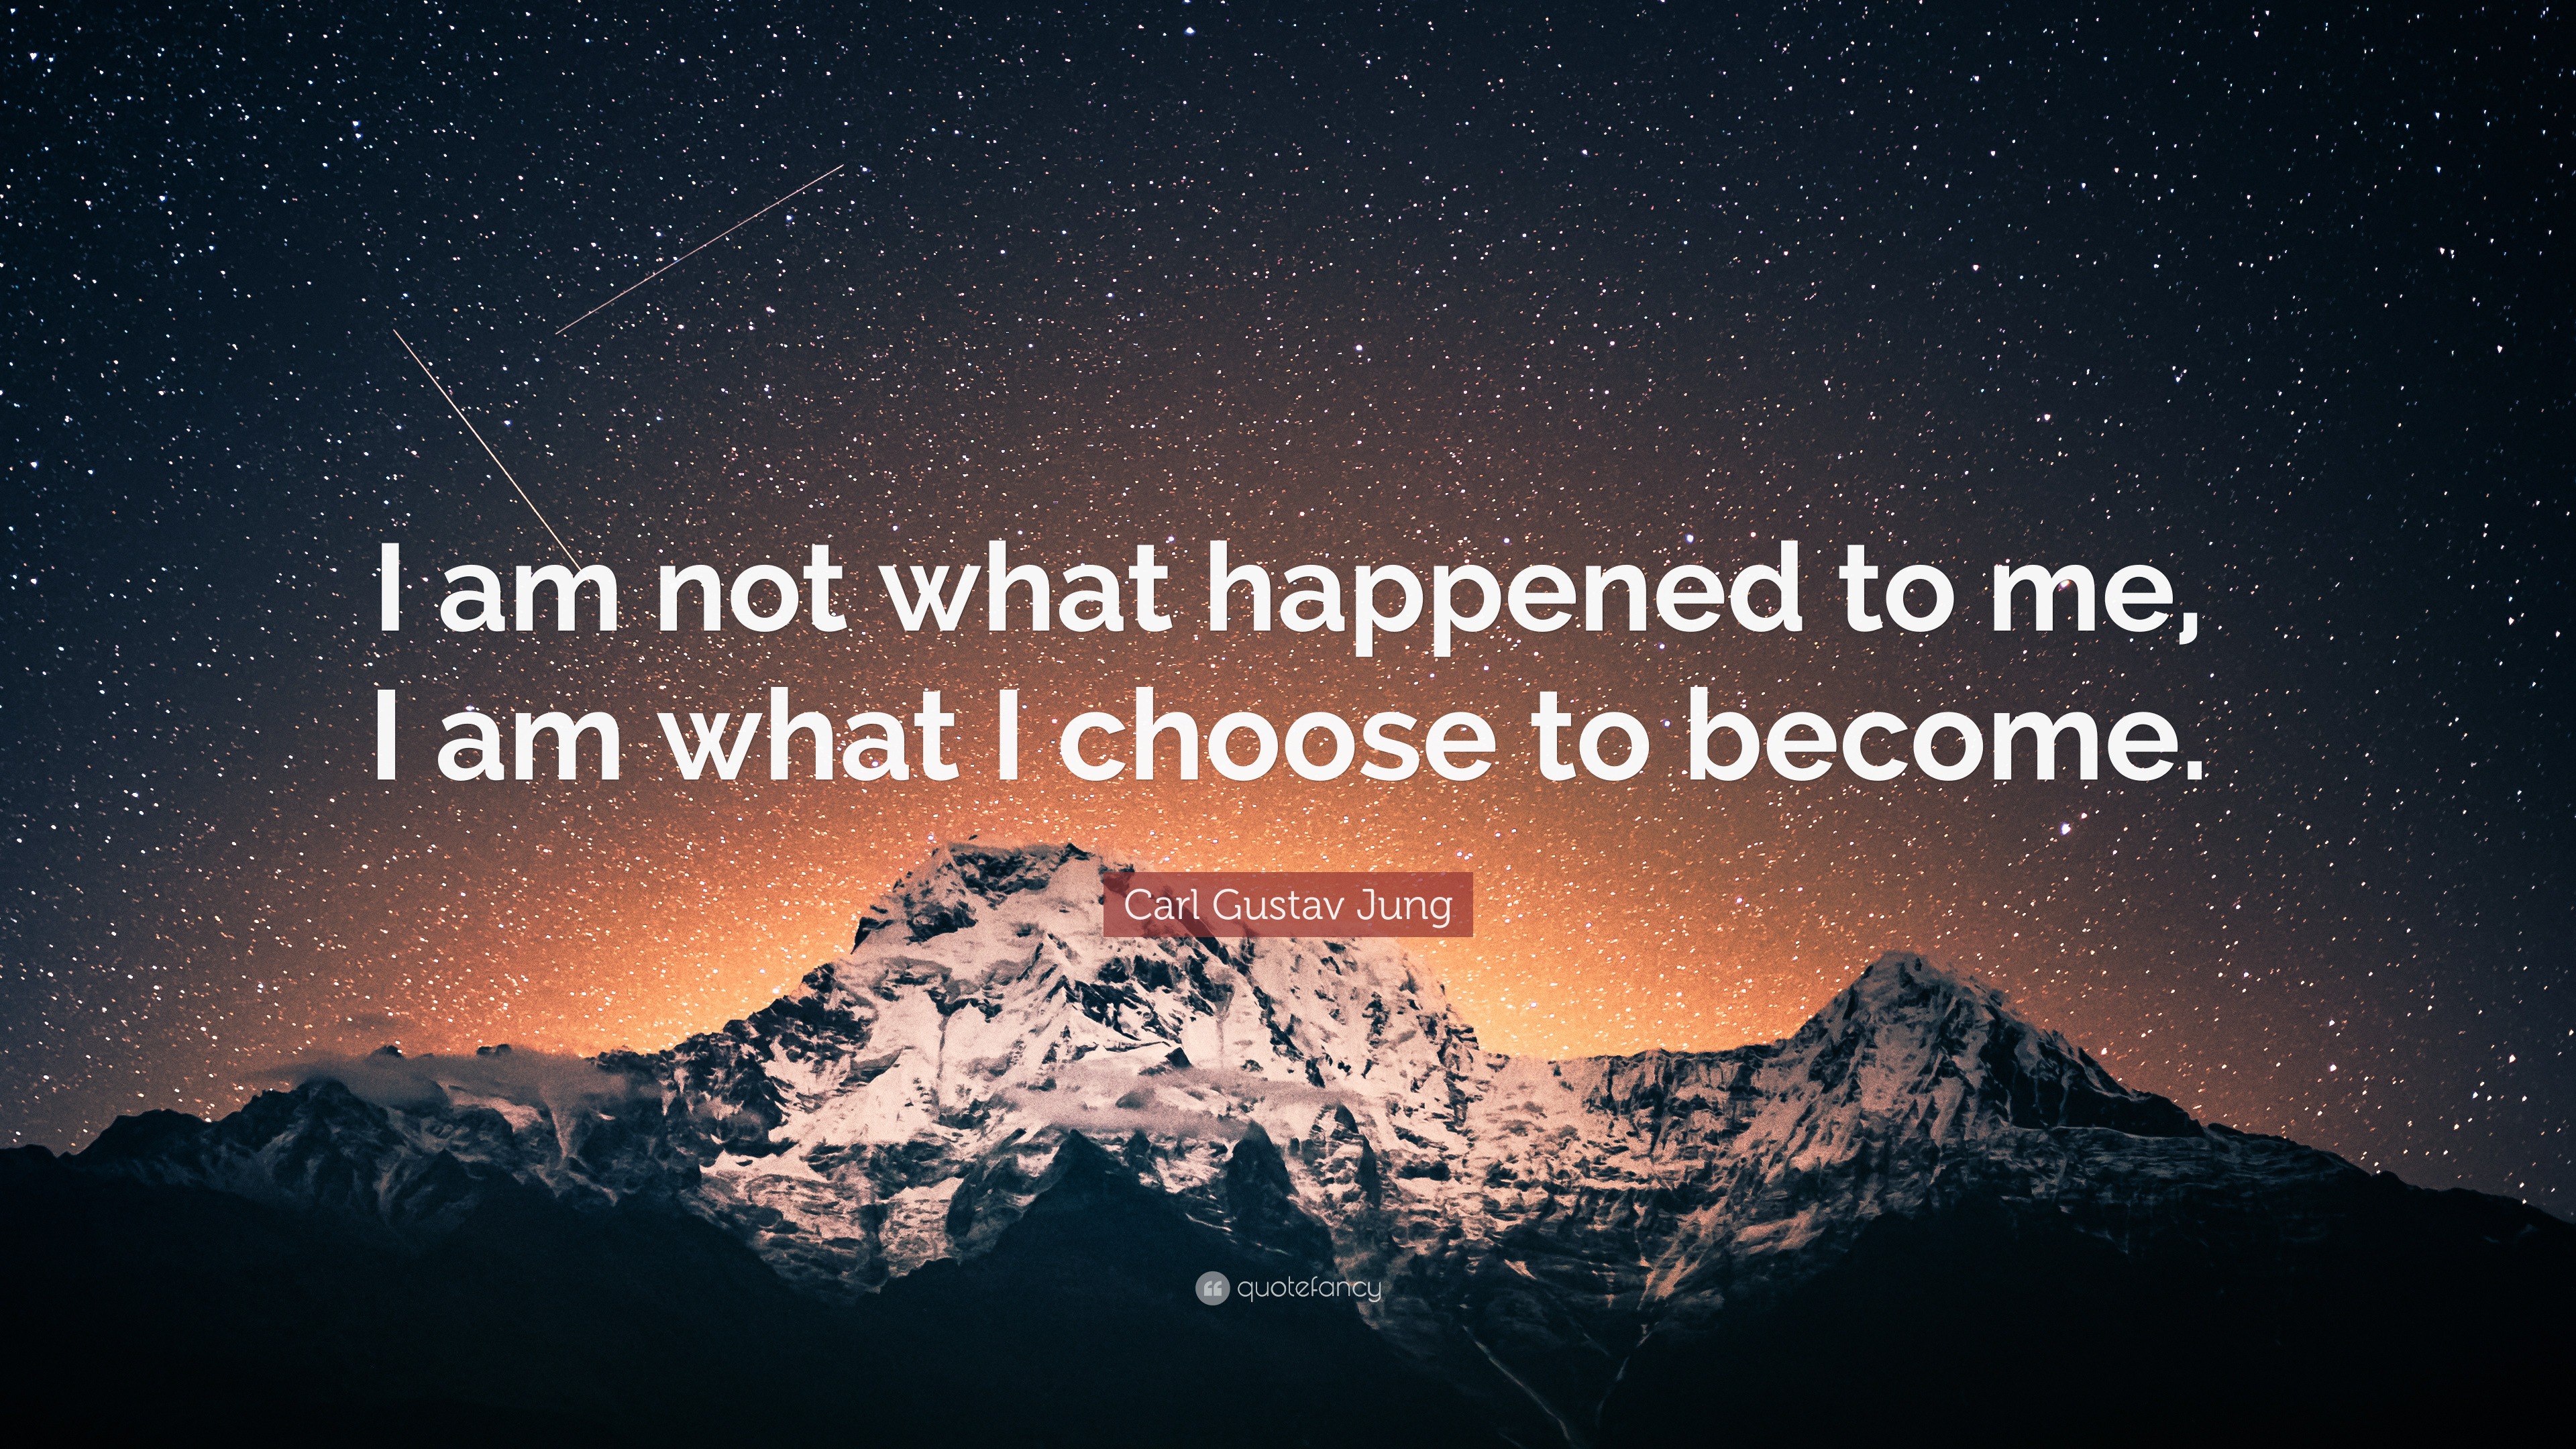 Carl Gustav Jung Quote: “I am not what happened to me, I am what I